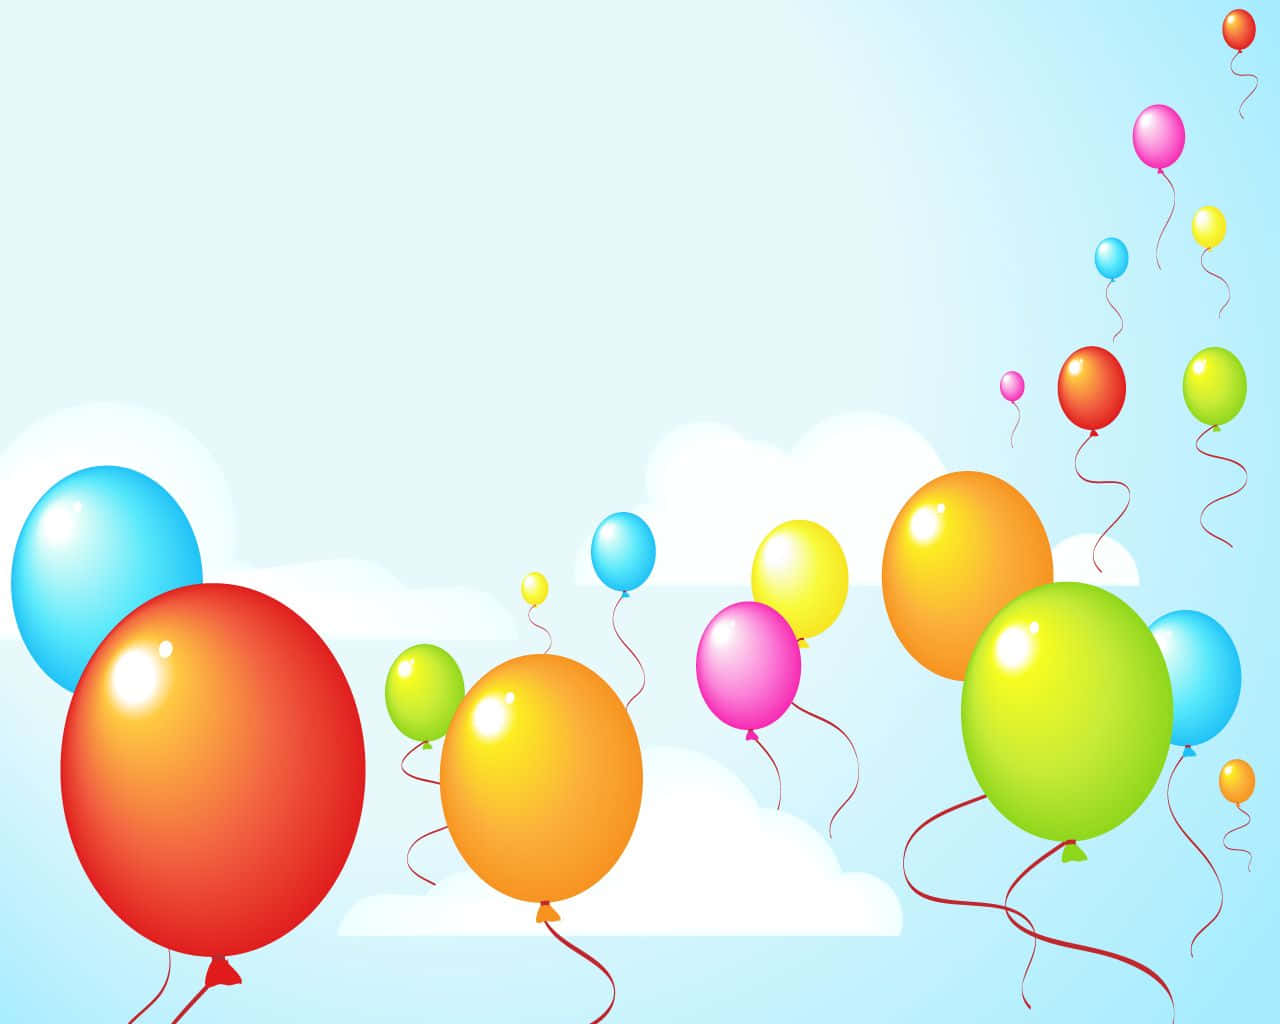 Celebrate a Bright and Colorful Birthday with Brightly Colored Balloons!